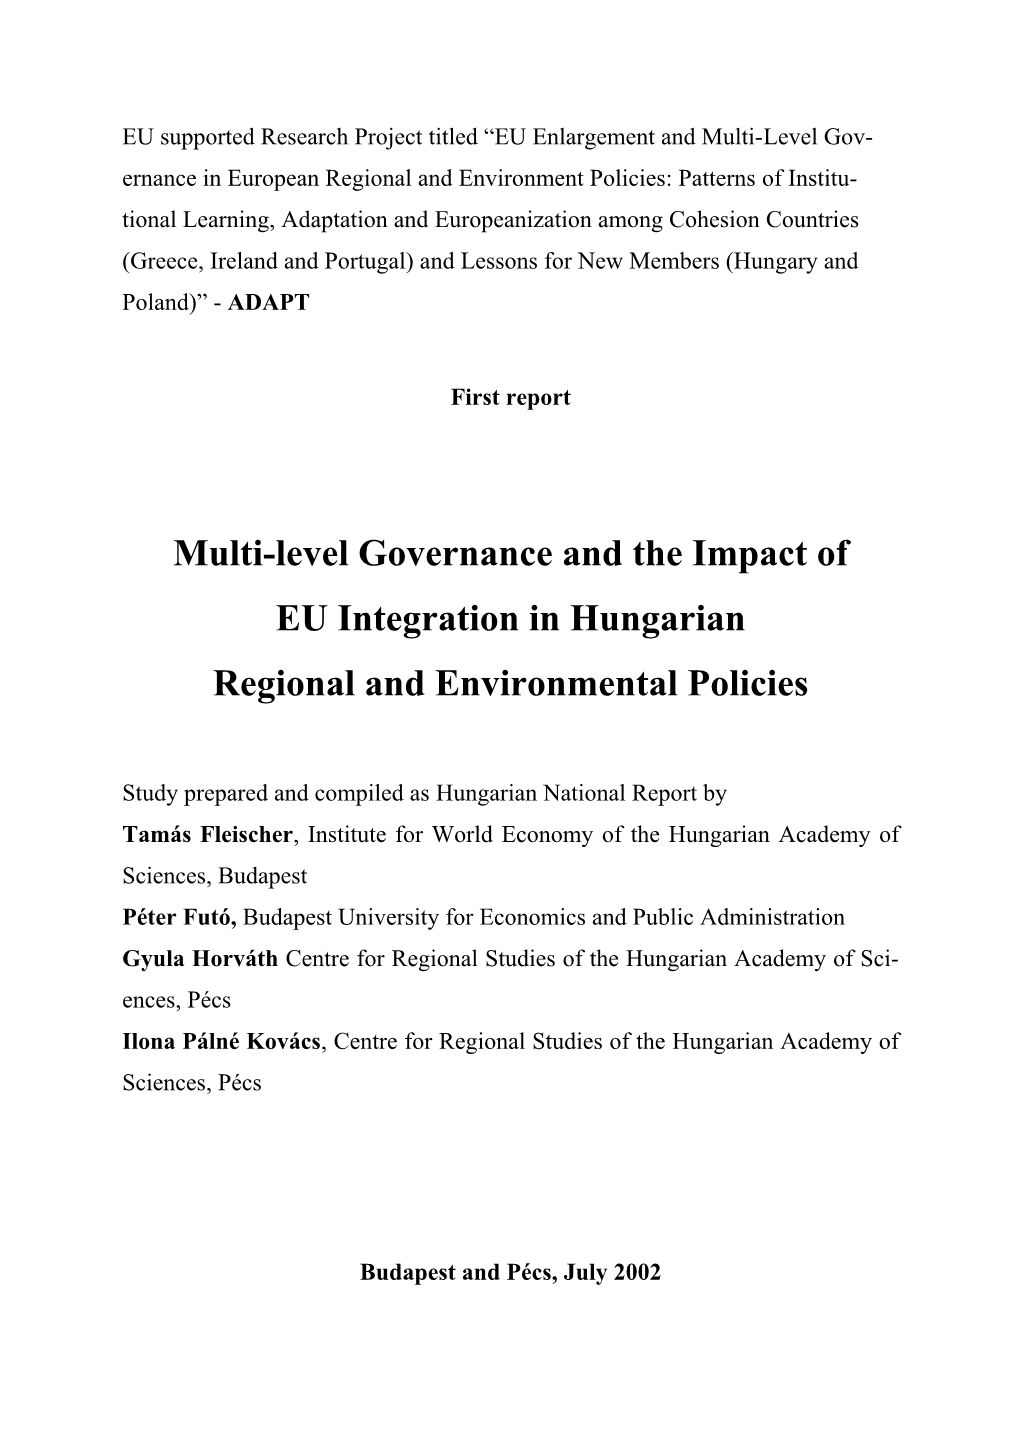 Multi-Level Governance and the Impact of EU Integration in Hungarian Regional and Environmental Policies